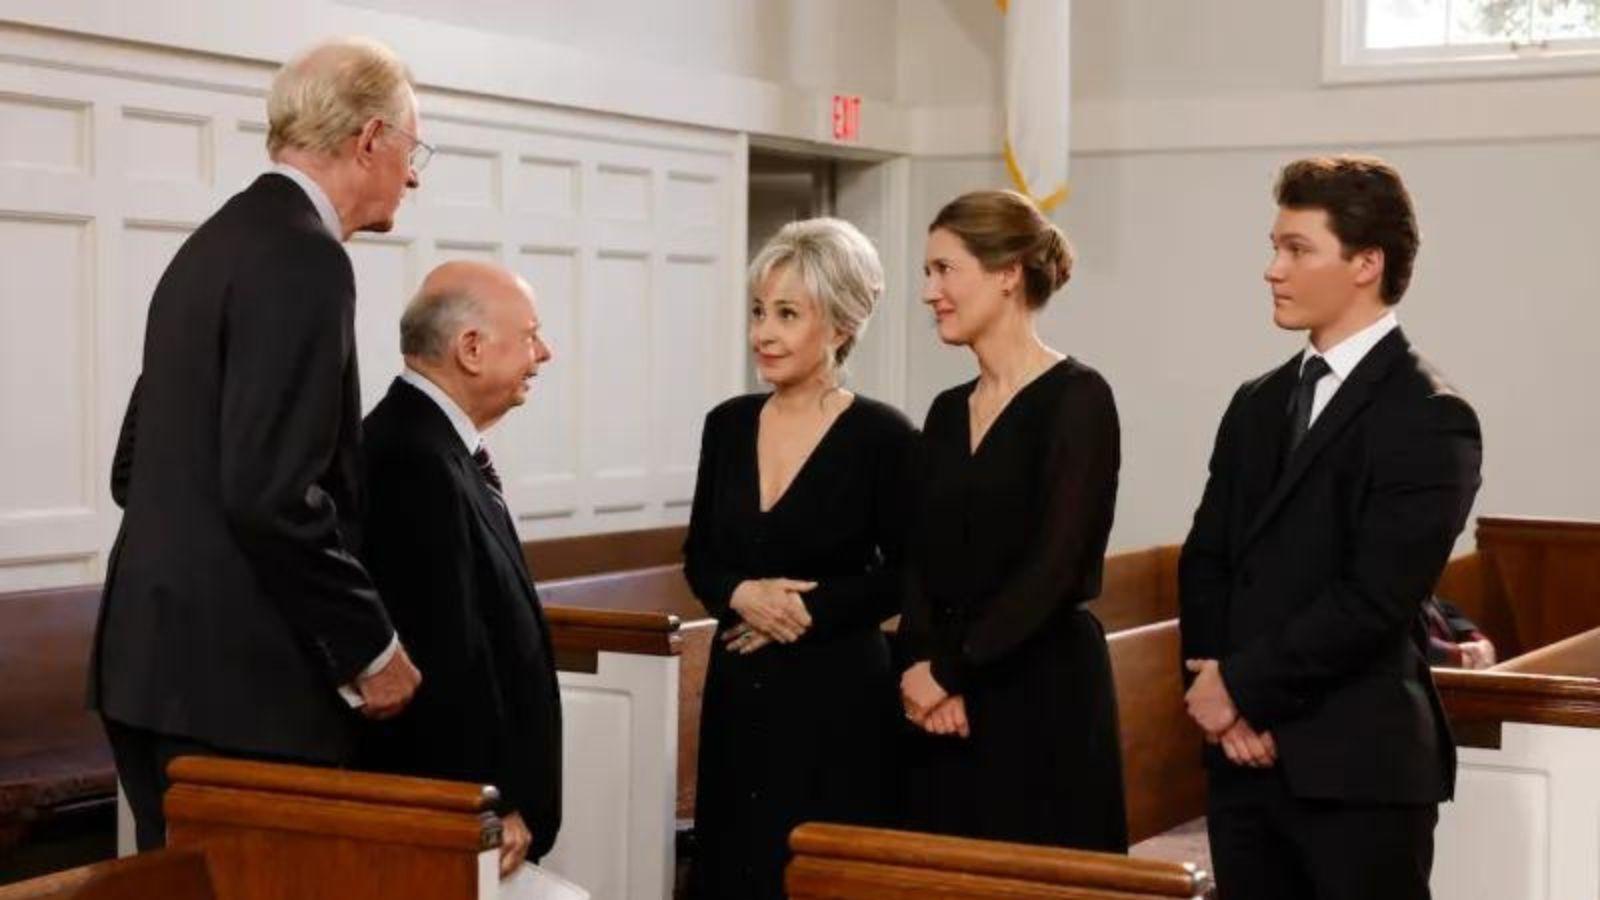 The Young Sheldon cast at George's funeral